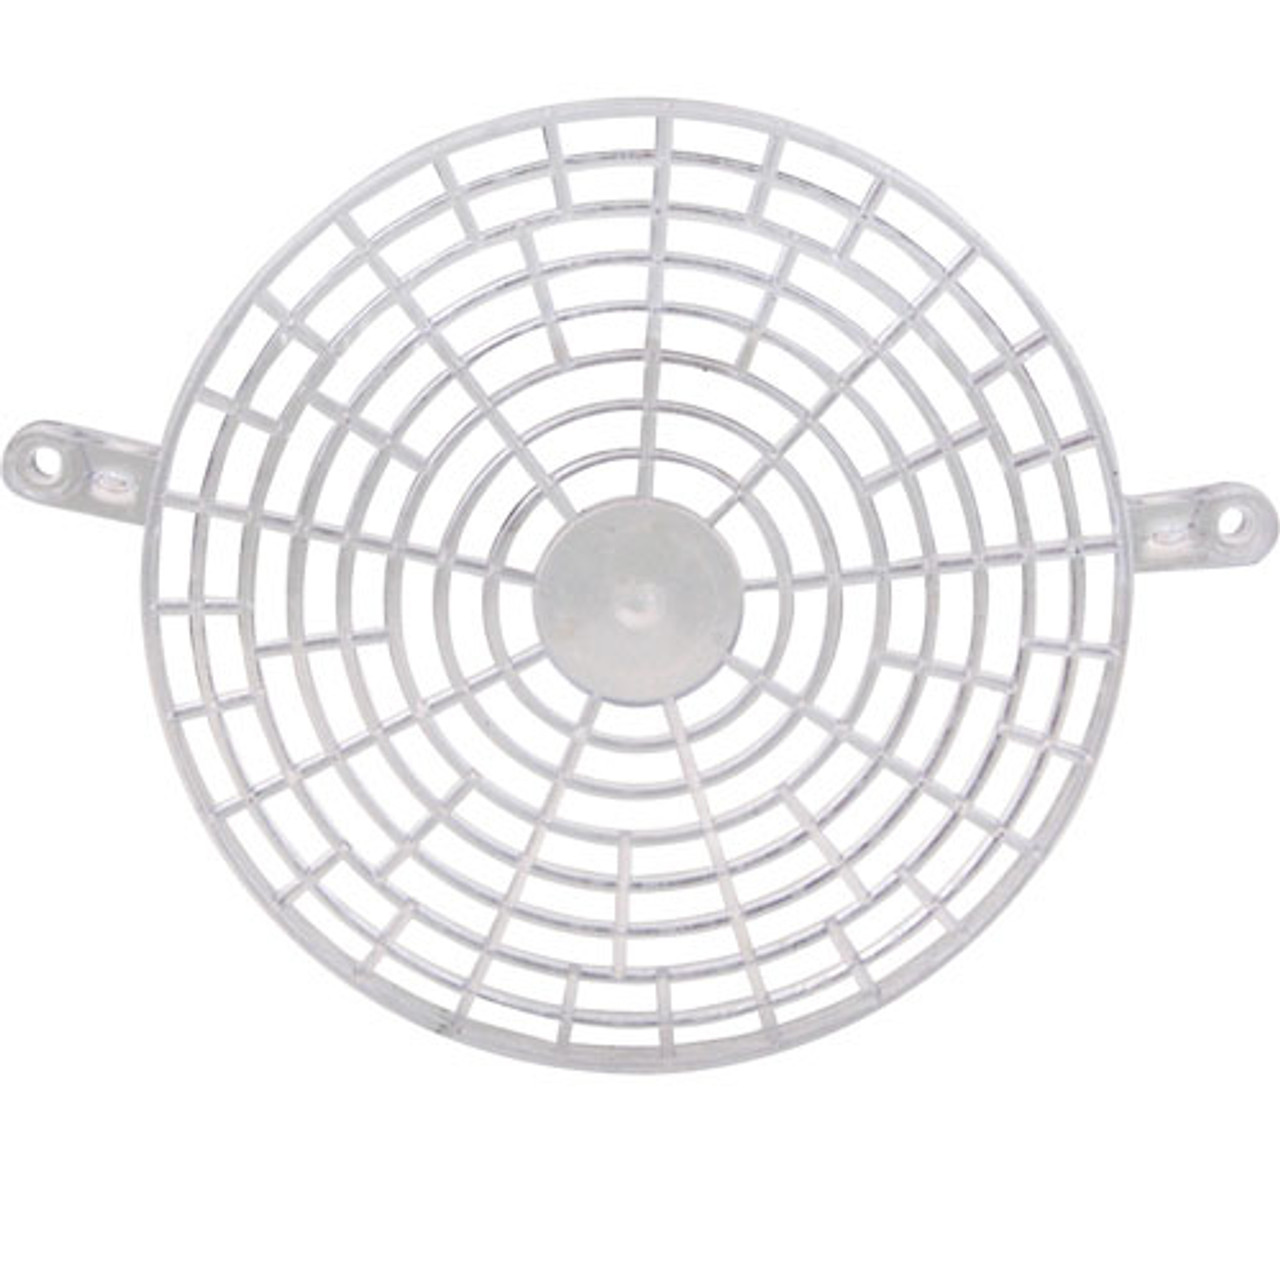 Guard,Evaporator Fan - Replacement Part For Peerless 3246